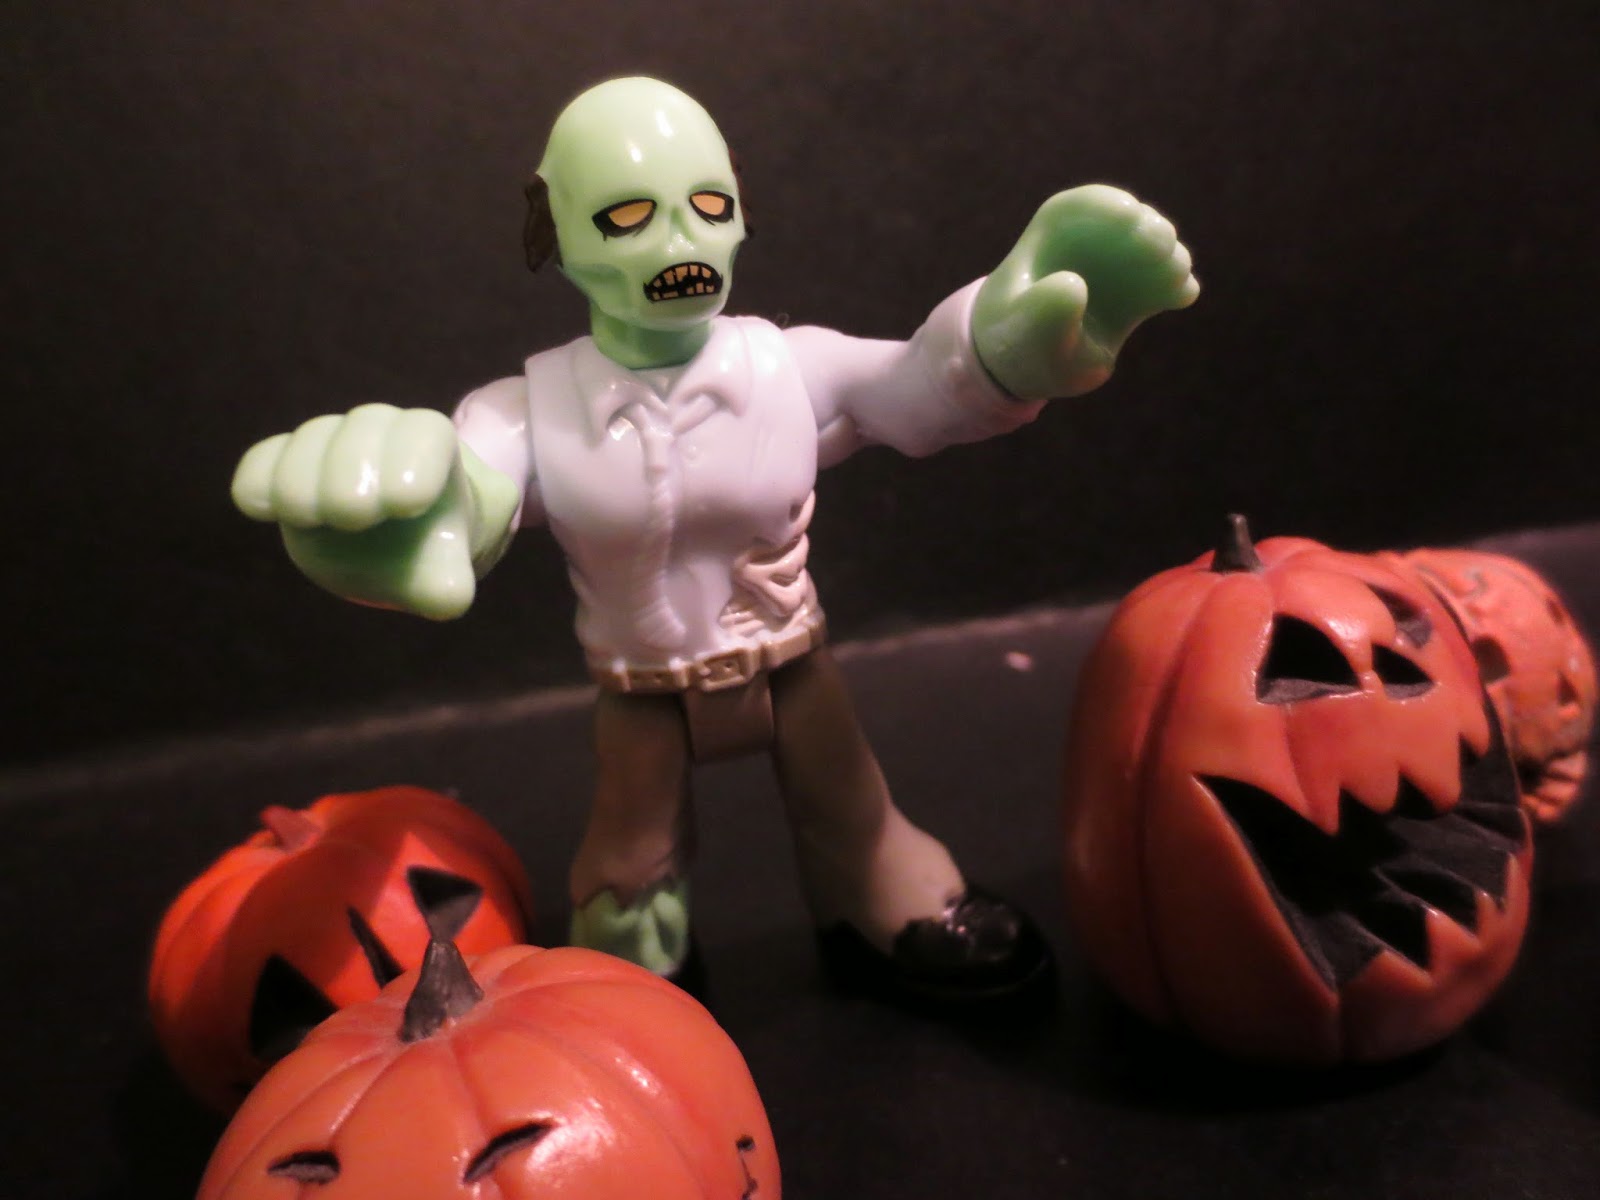 Spooky Toy Review: Zombie from Imaginext Collectible Figures